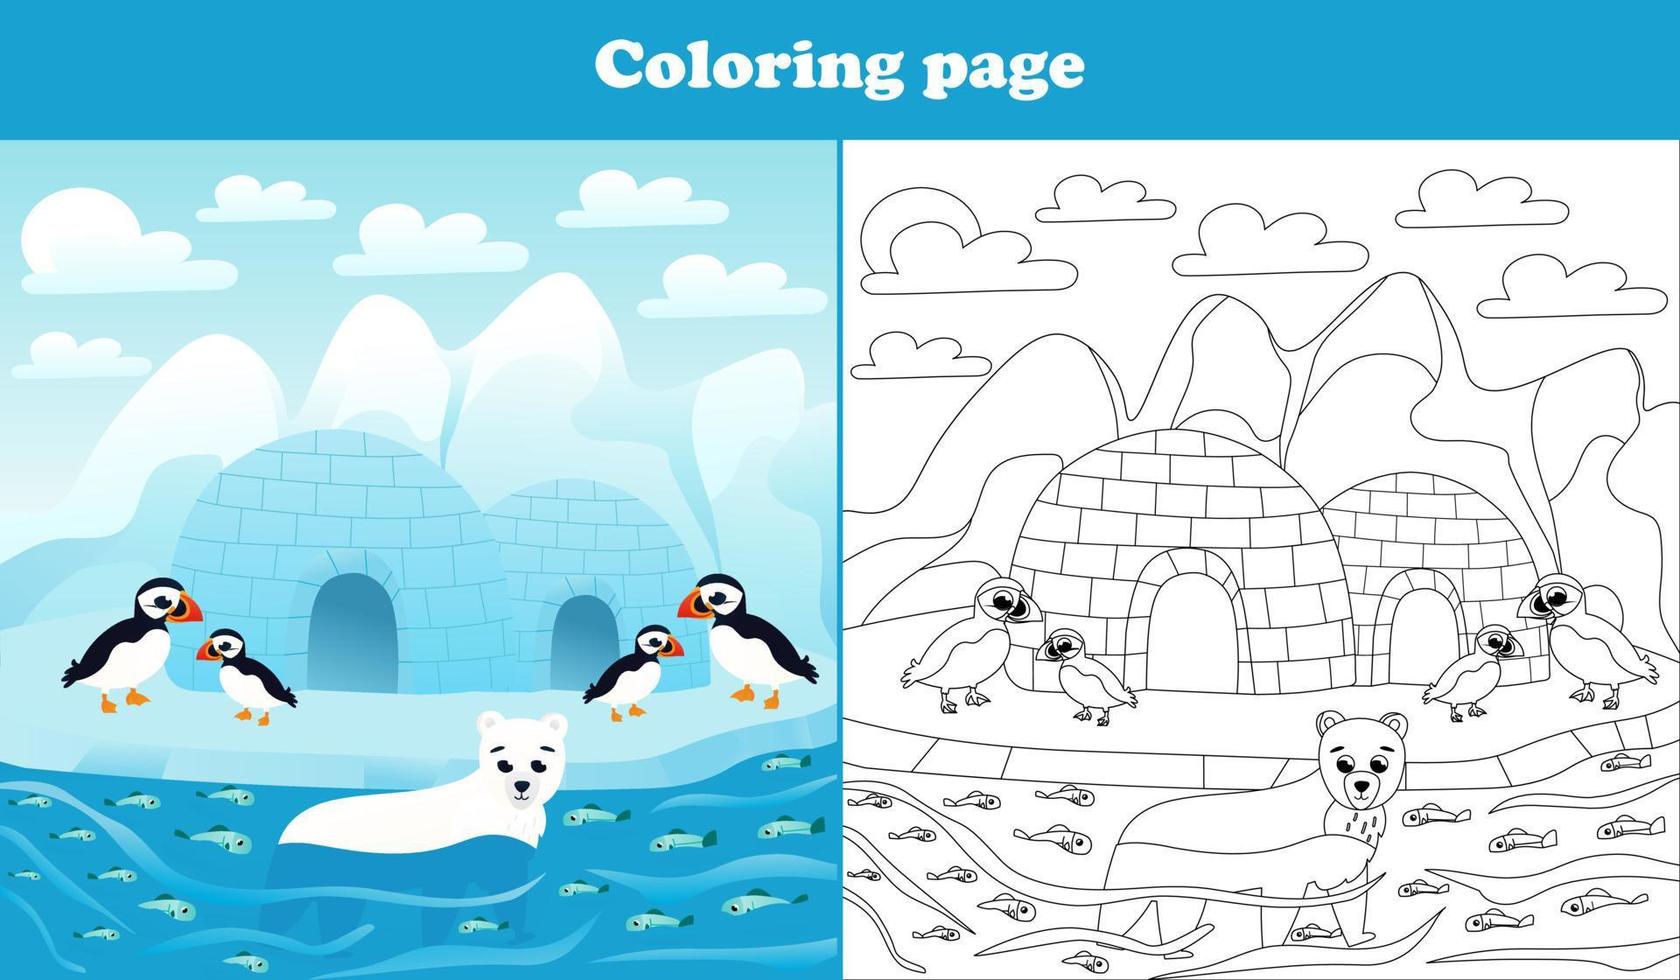 Arctic landscape for kids with cute puffin and polar bear characters, coloring page for children books, printable worksheet in cartoon style for school, animal wildlife theme vector